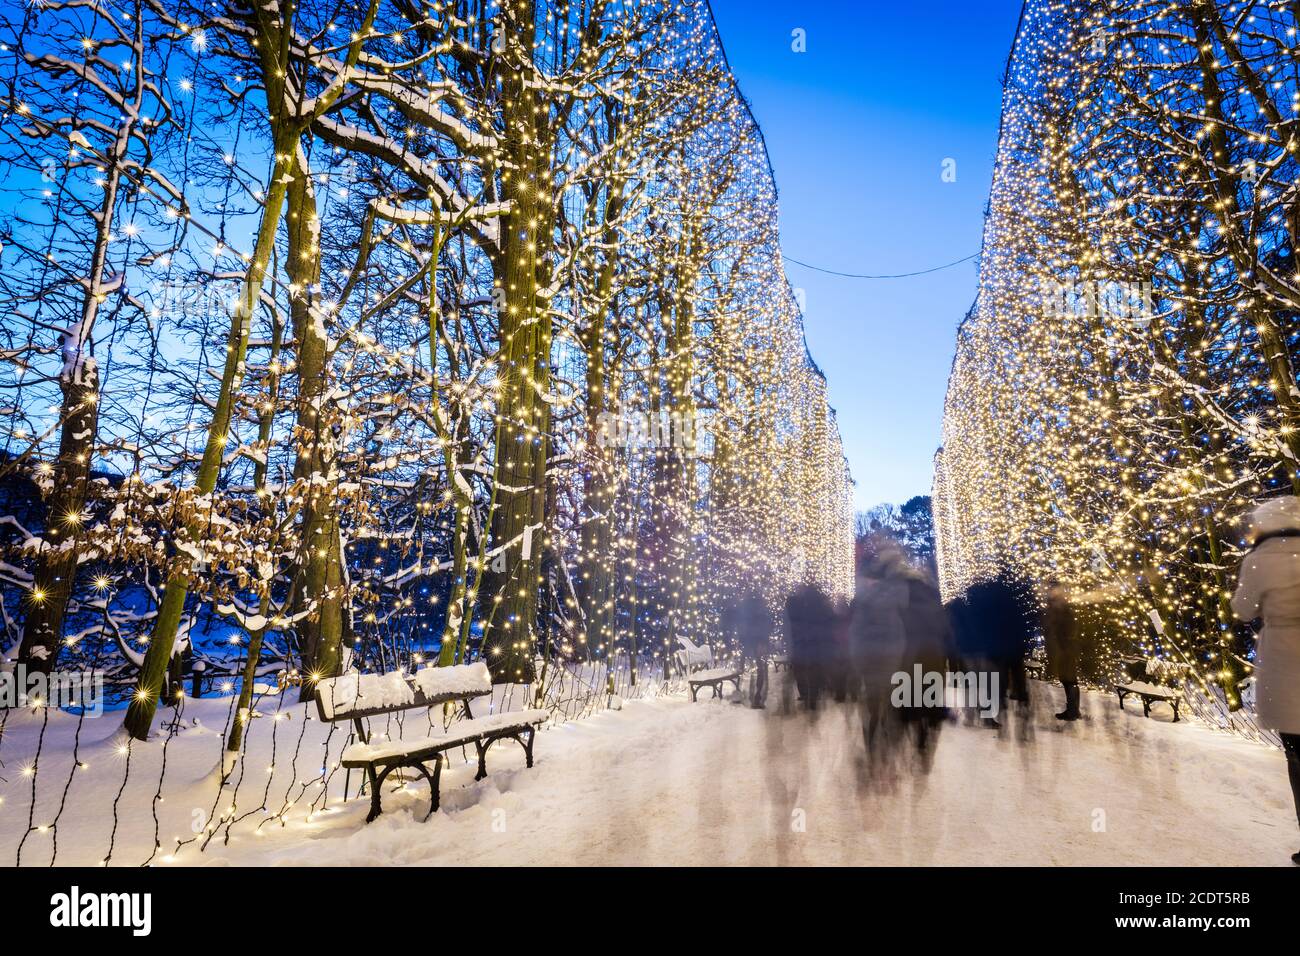 People walking in winter park decorated with lights. Park Oliwski, Gdansk, Poland Stock Photo